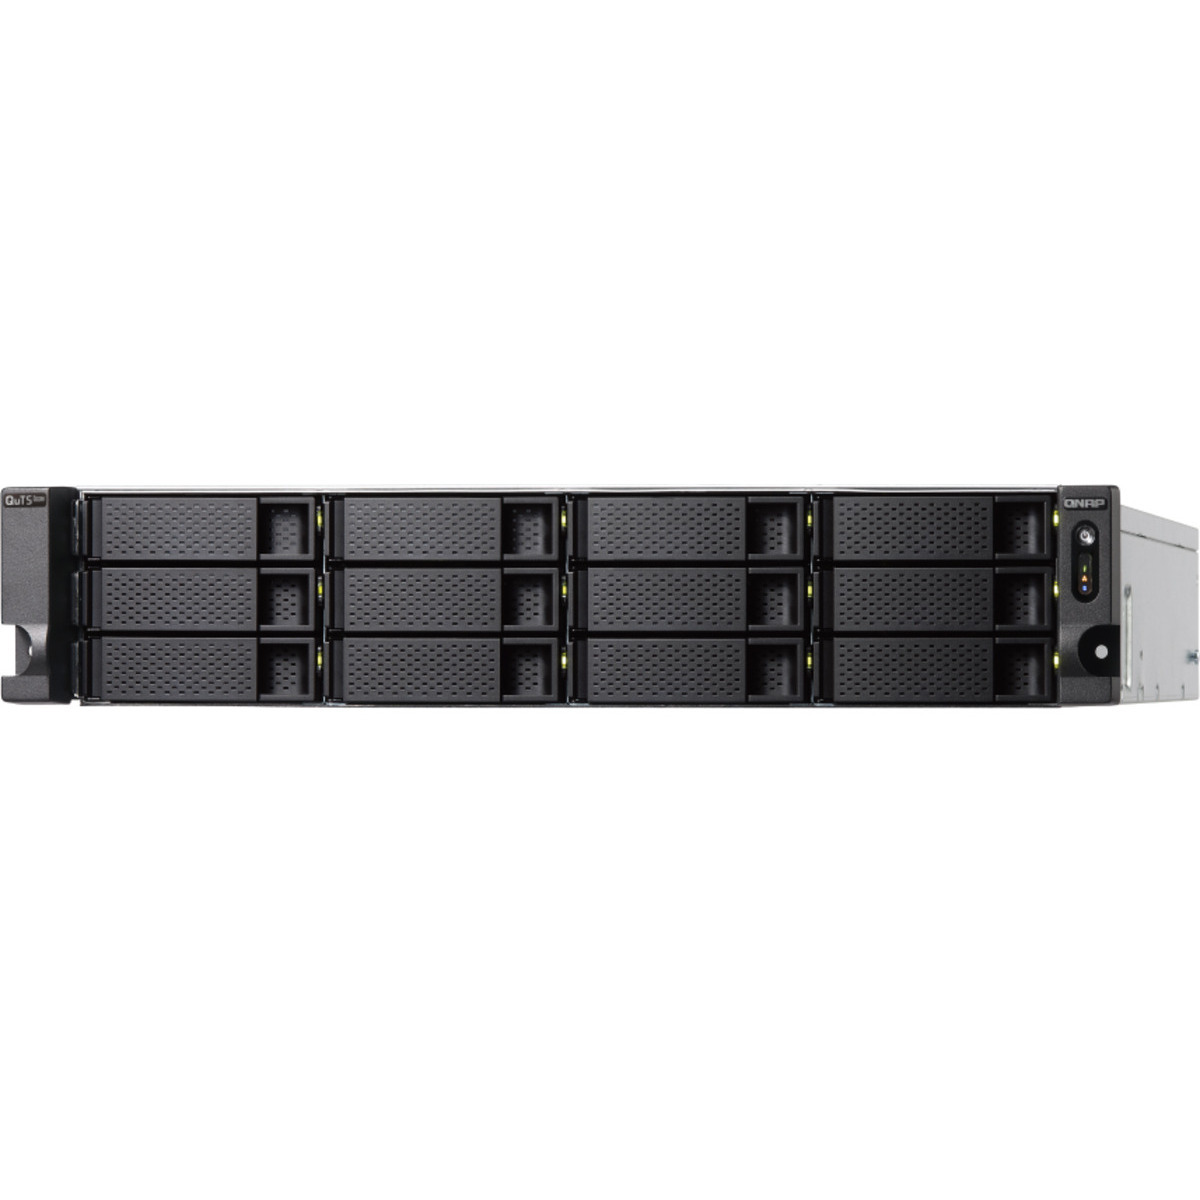 QNAP TS-h1886XU-RP R2 QuTS hero Edition 240tb 12+6-Bay RackMount Large Business / Enterprise NAS - Network Attached Storage Device 10x24tb Western Digital Ultrastar HC580 WUH722424ALE6L4 3.5 7200rpm SATA 6Gb/s HDD ENTERPRISE Class Drives Installed - Burn-In Tested TS-h1886XU-RP R2 QuTS hero Edition